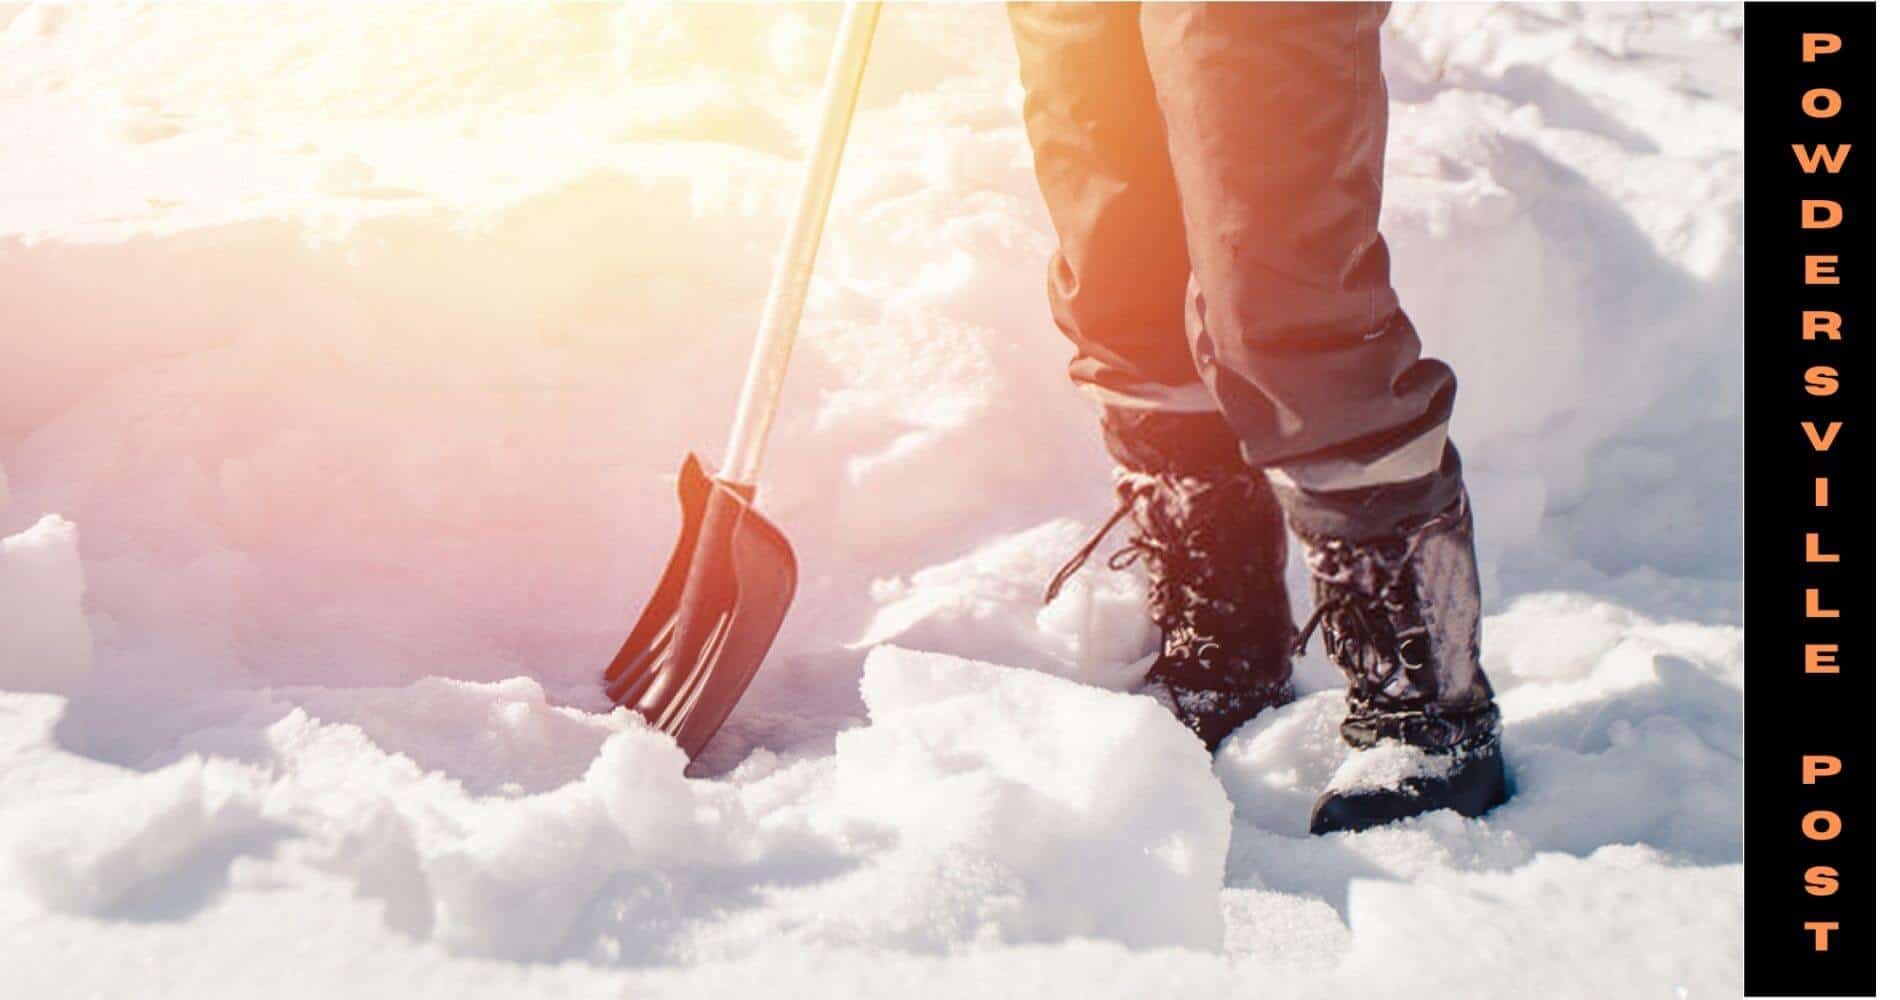 Shoveling-Snow-Is-Not-Good-For-Your-Heart-Warns-AHA